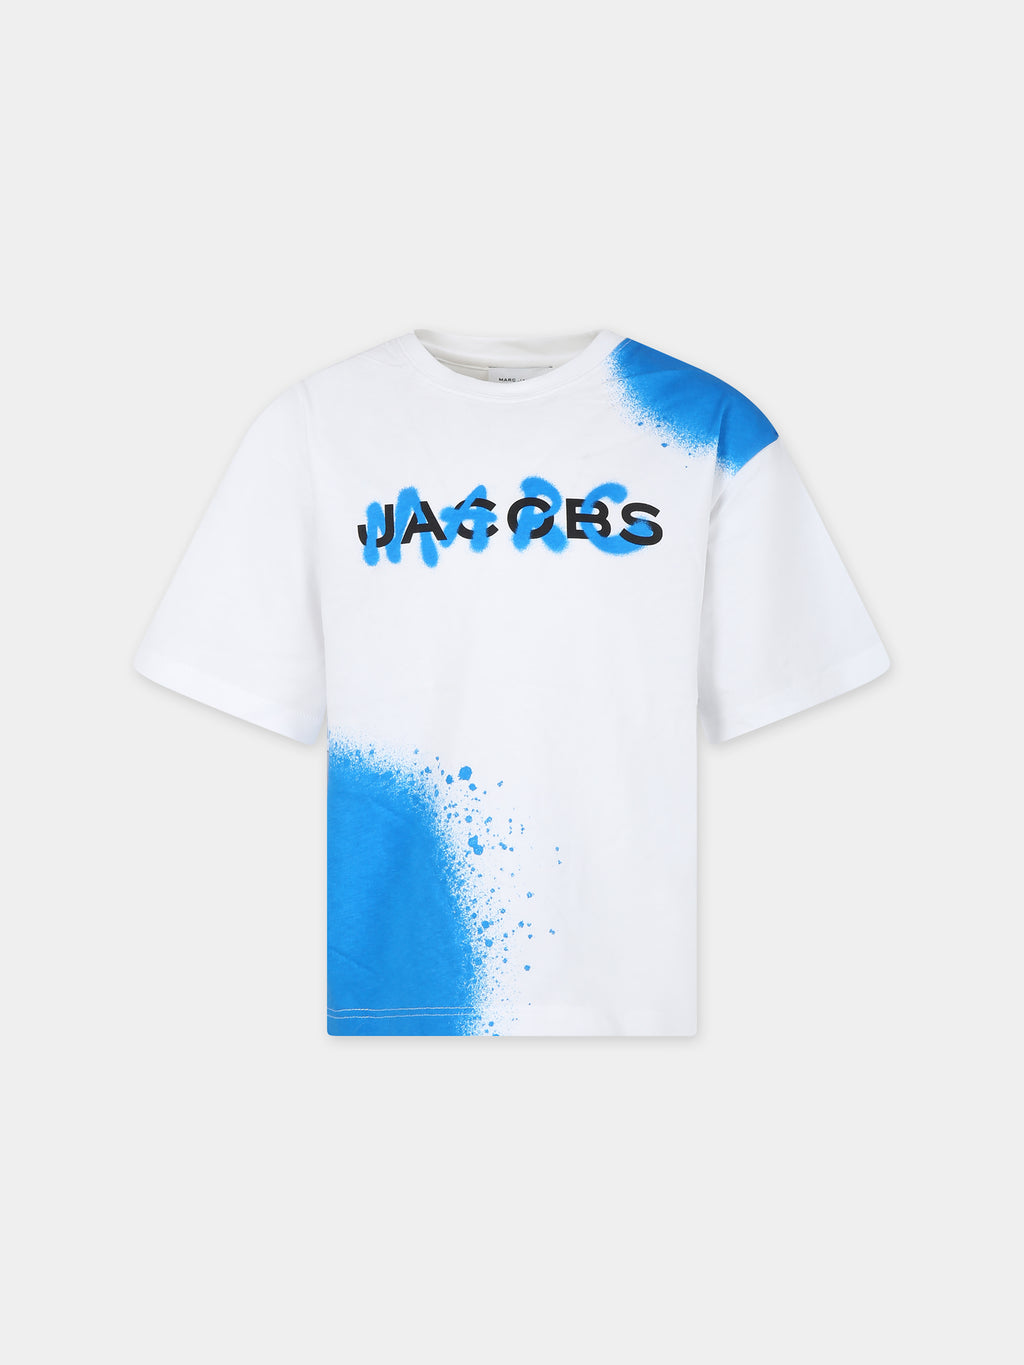 White t-shirt for kids with logo and print